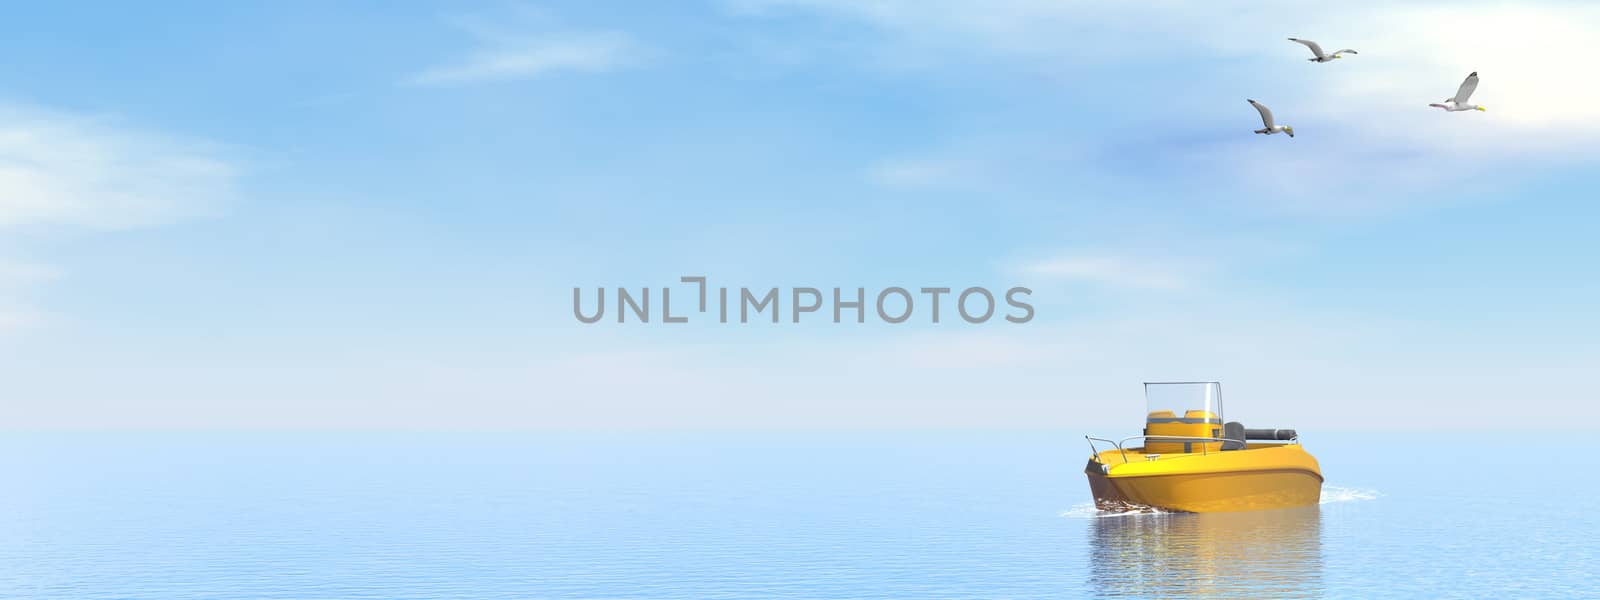 Small pleasance boat on the water and segulls by beautiful day - 3D render